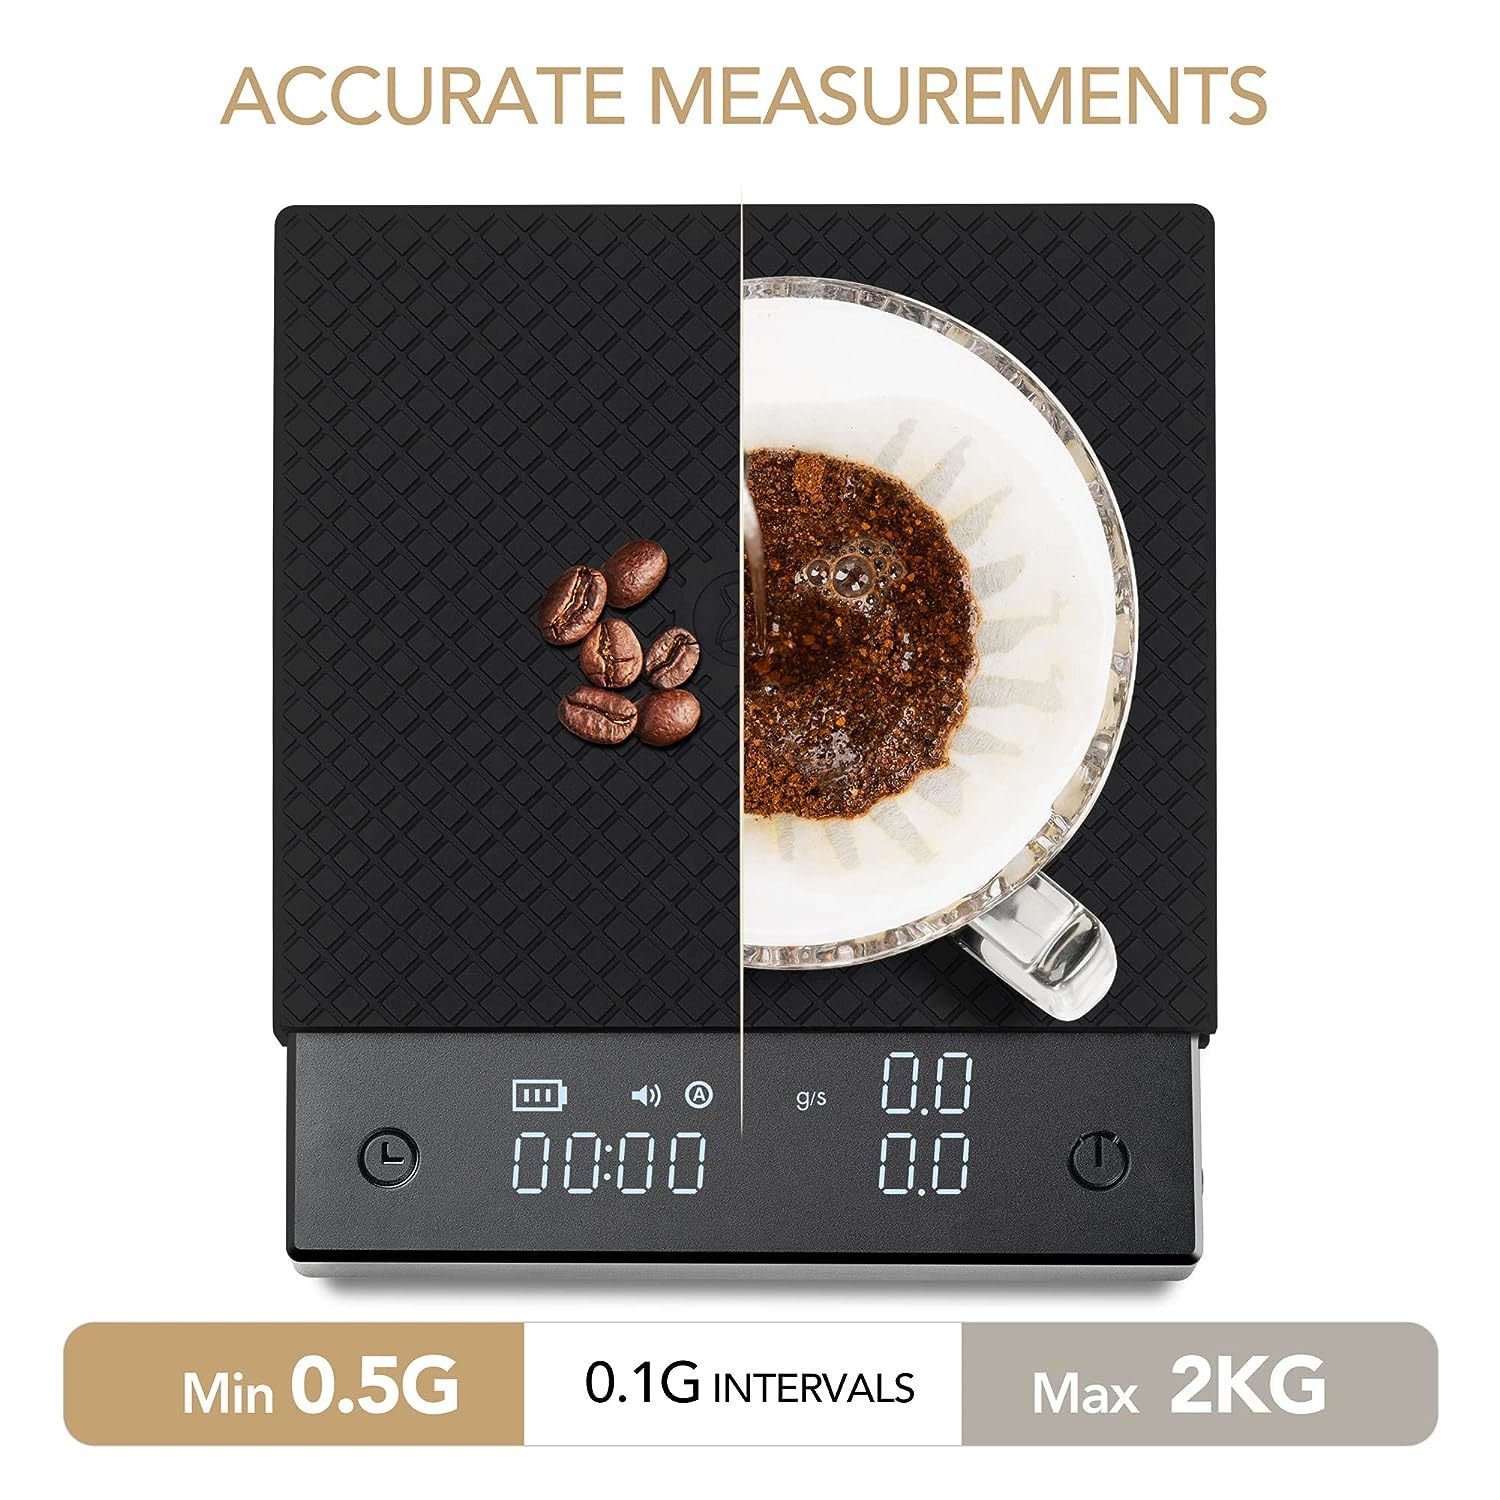 WOWOHE Digital Food Kitchen Scales Gram Scale - Portable Jewelry Coffee Weed  Pocket Scale LCD Display Accuracy 0.01g Capacity 500g